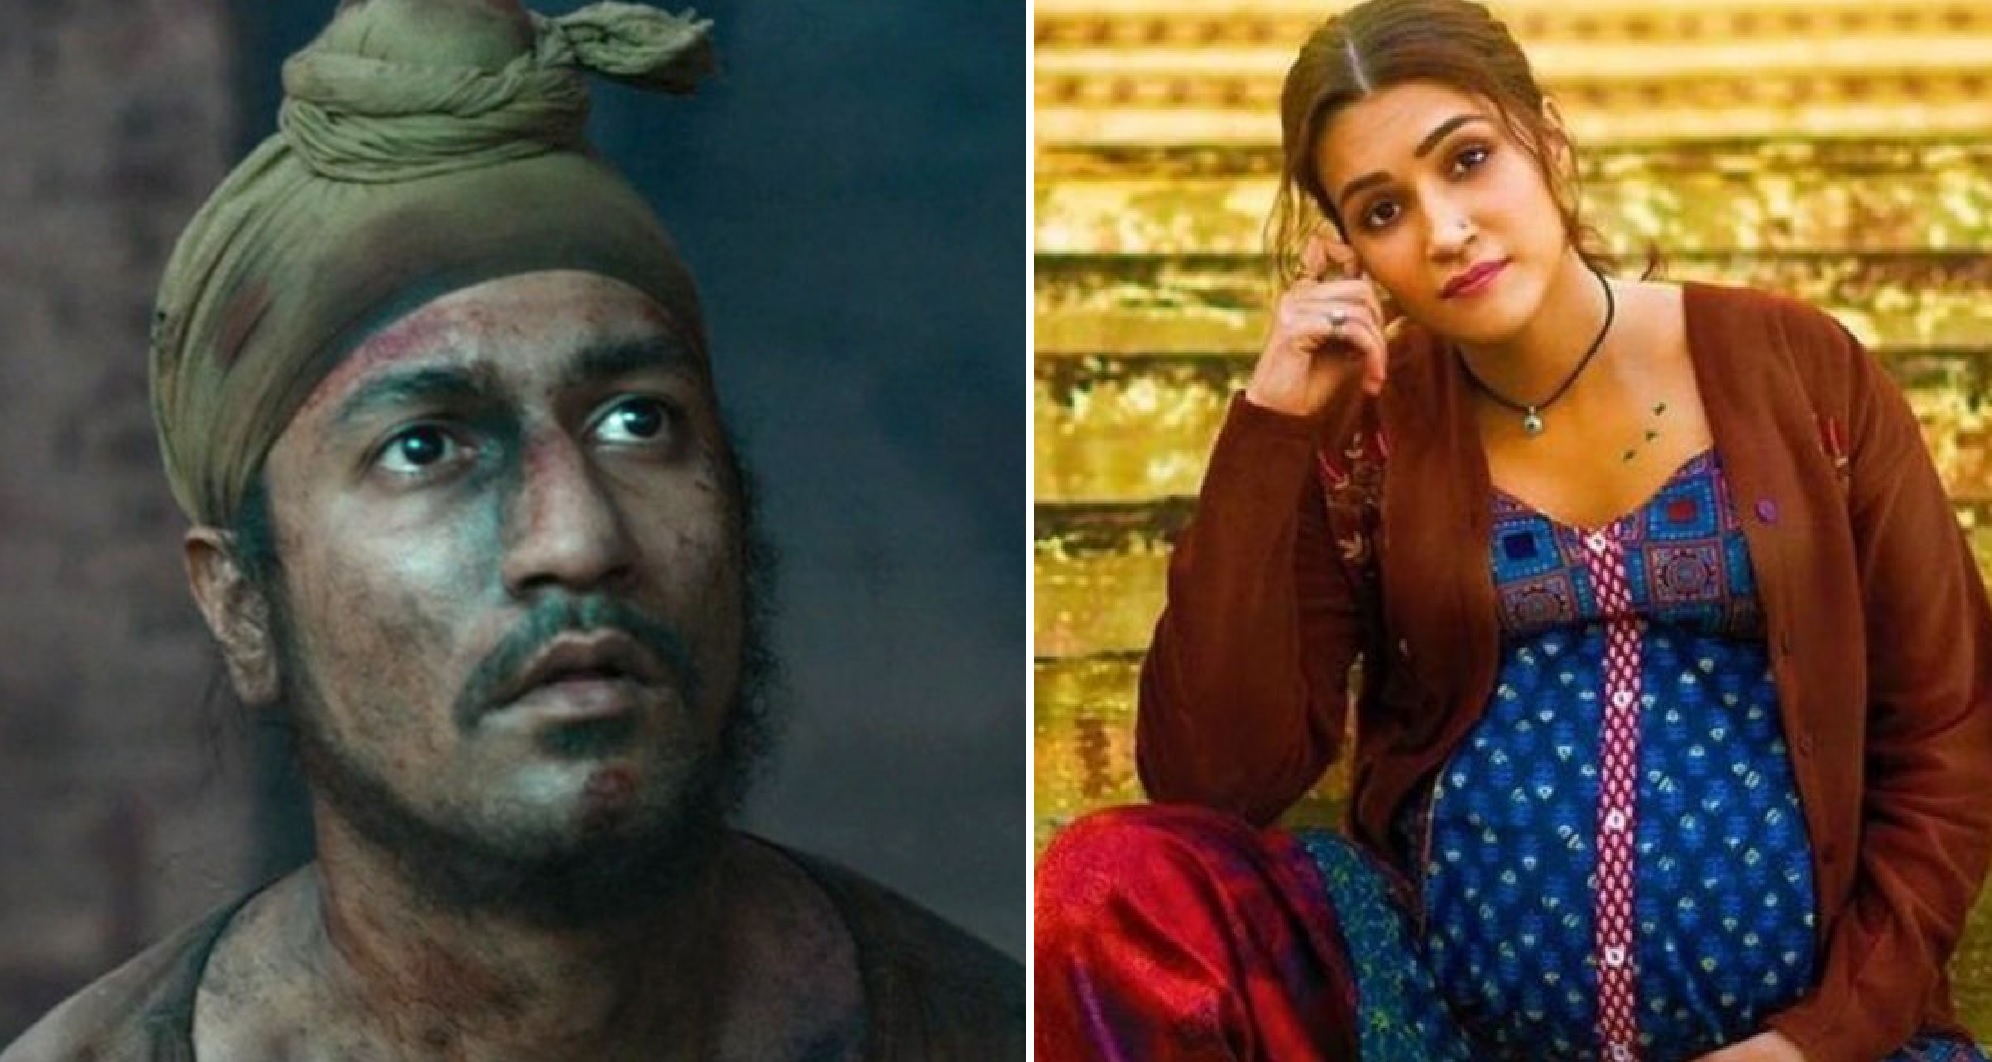 Vicky Kaushal Wins ‘Best Actor’ Award For ‘Sardar Udham Singh’, Kriti Sanon Grabs ‘Best Actress’ For ‘Mimi’ At IIFA